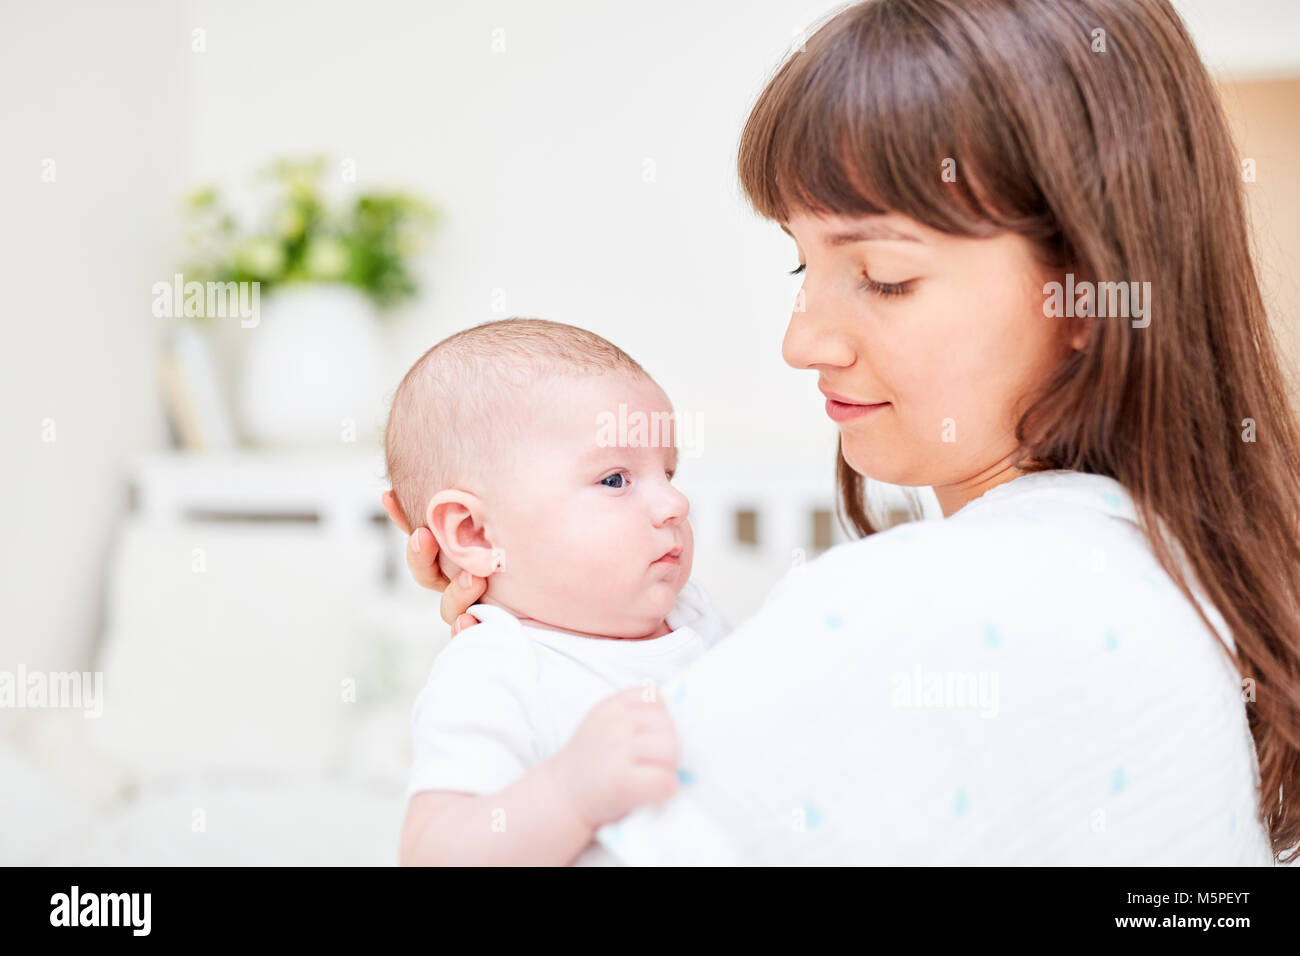 Woman as a loving mother holds her newborn baby tenderly in her arms Stock Photo